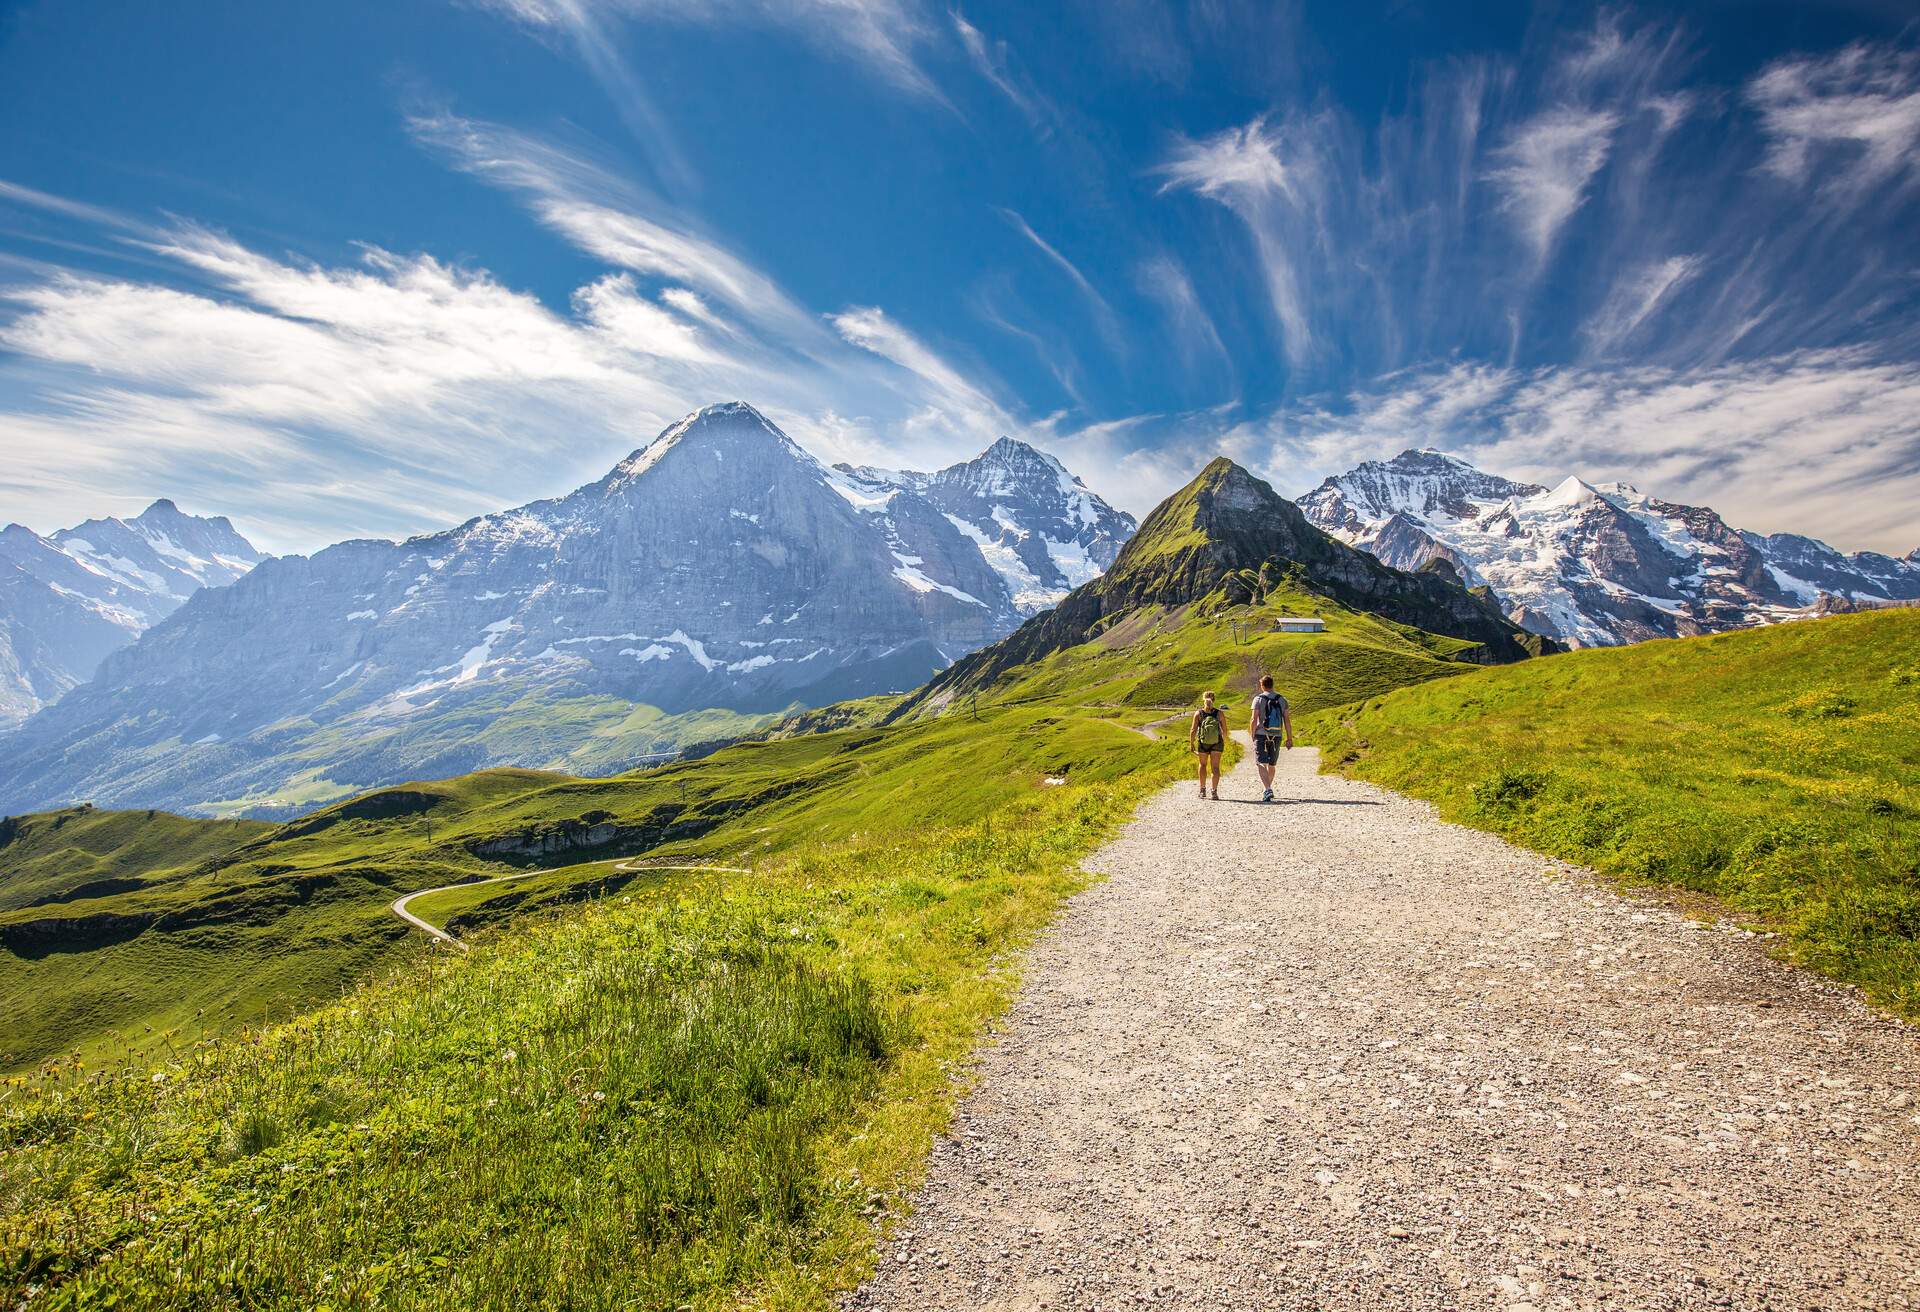 Young couple hiking in panorama trail leading to Kleine Scheidegg from Mannlichen with Eiger, Monch and Jungfrau mountain (Swiss Alps) in the background, Berner Oberland, Grindelwald, Switzerland